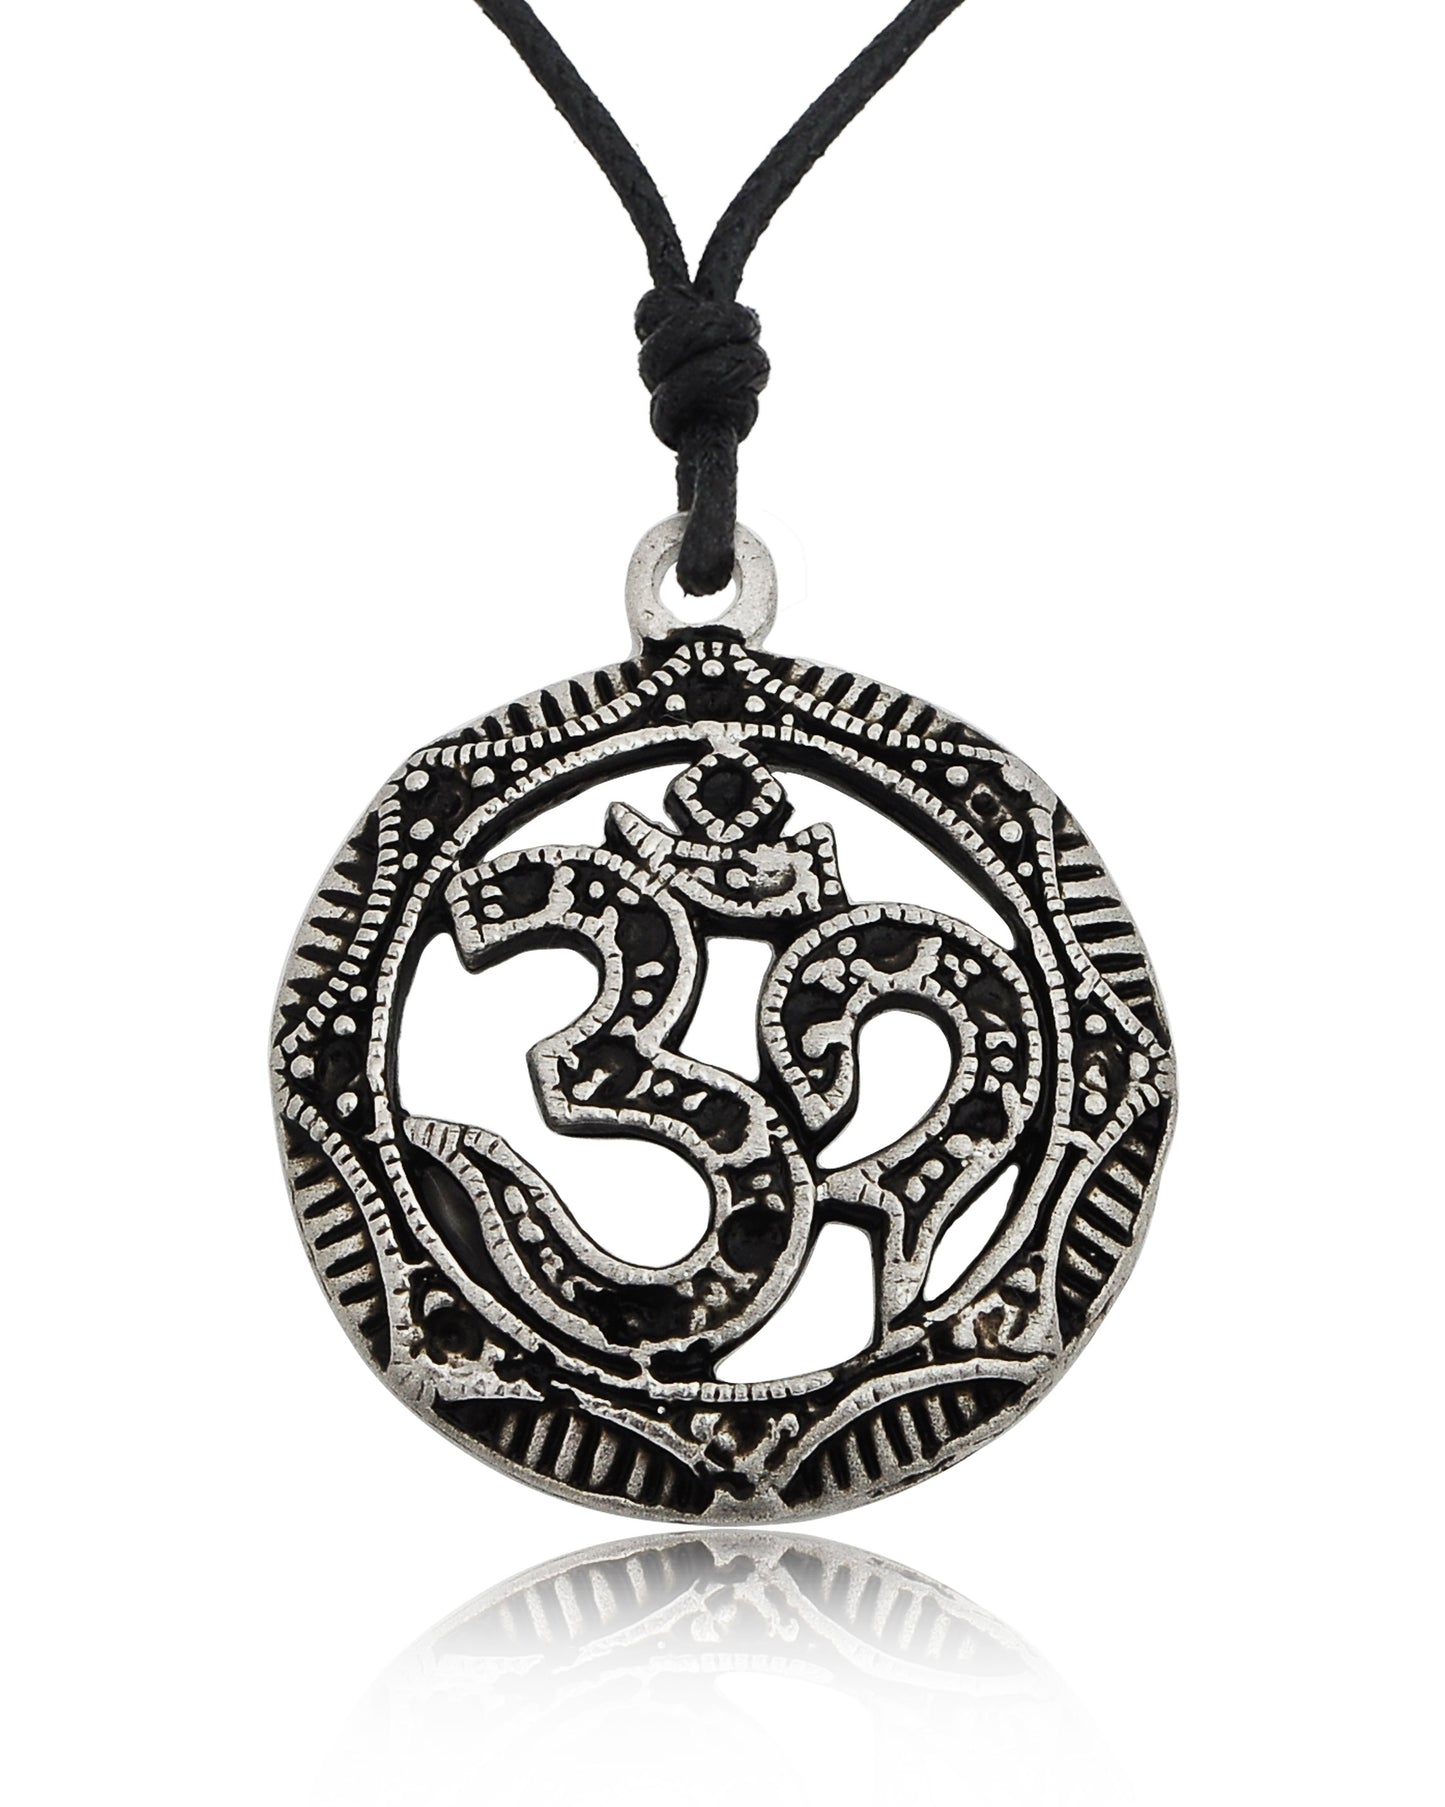 Ohm Aum Om Handcrafted Silver Pewter Brass Charm Necklace Pendant Jewelry